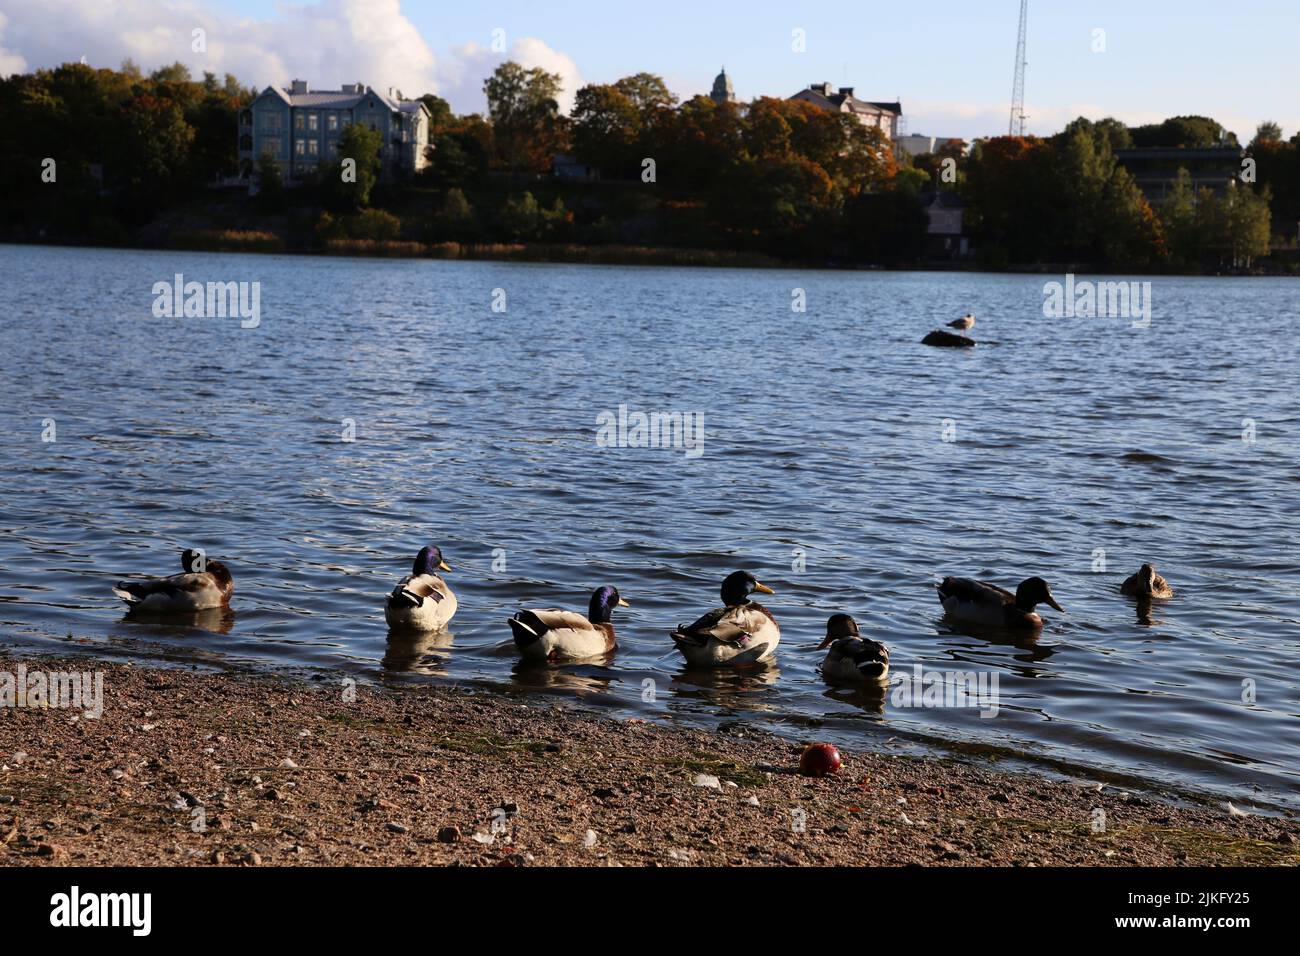 Mallard ducts swimming in the Töölönlahti Bay Helsinki, Finland, September 2019. In the background there is the famous blue villa and other buildings. Stock Photo